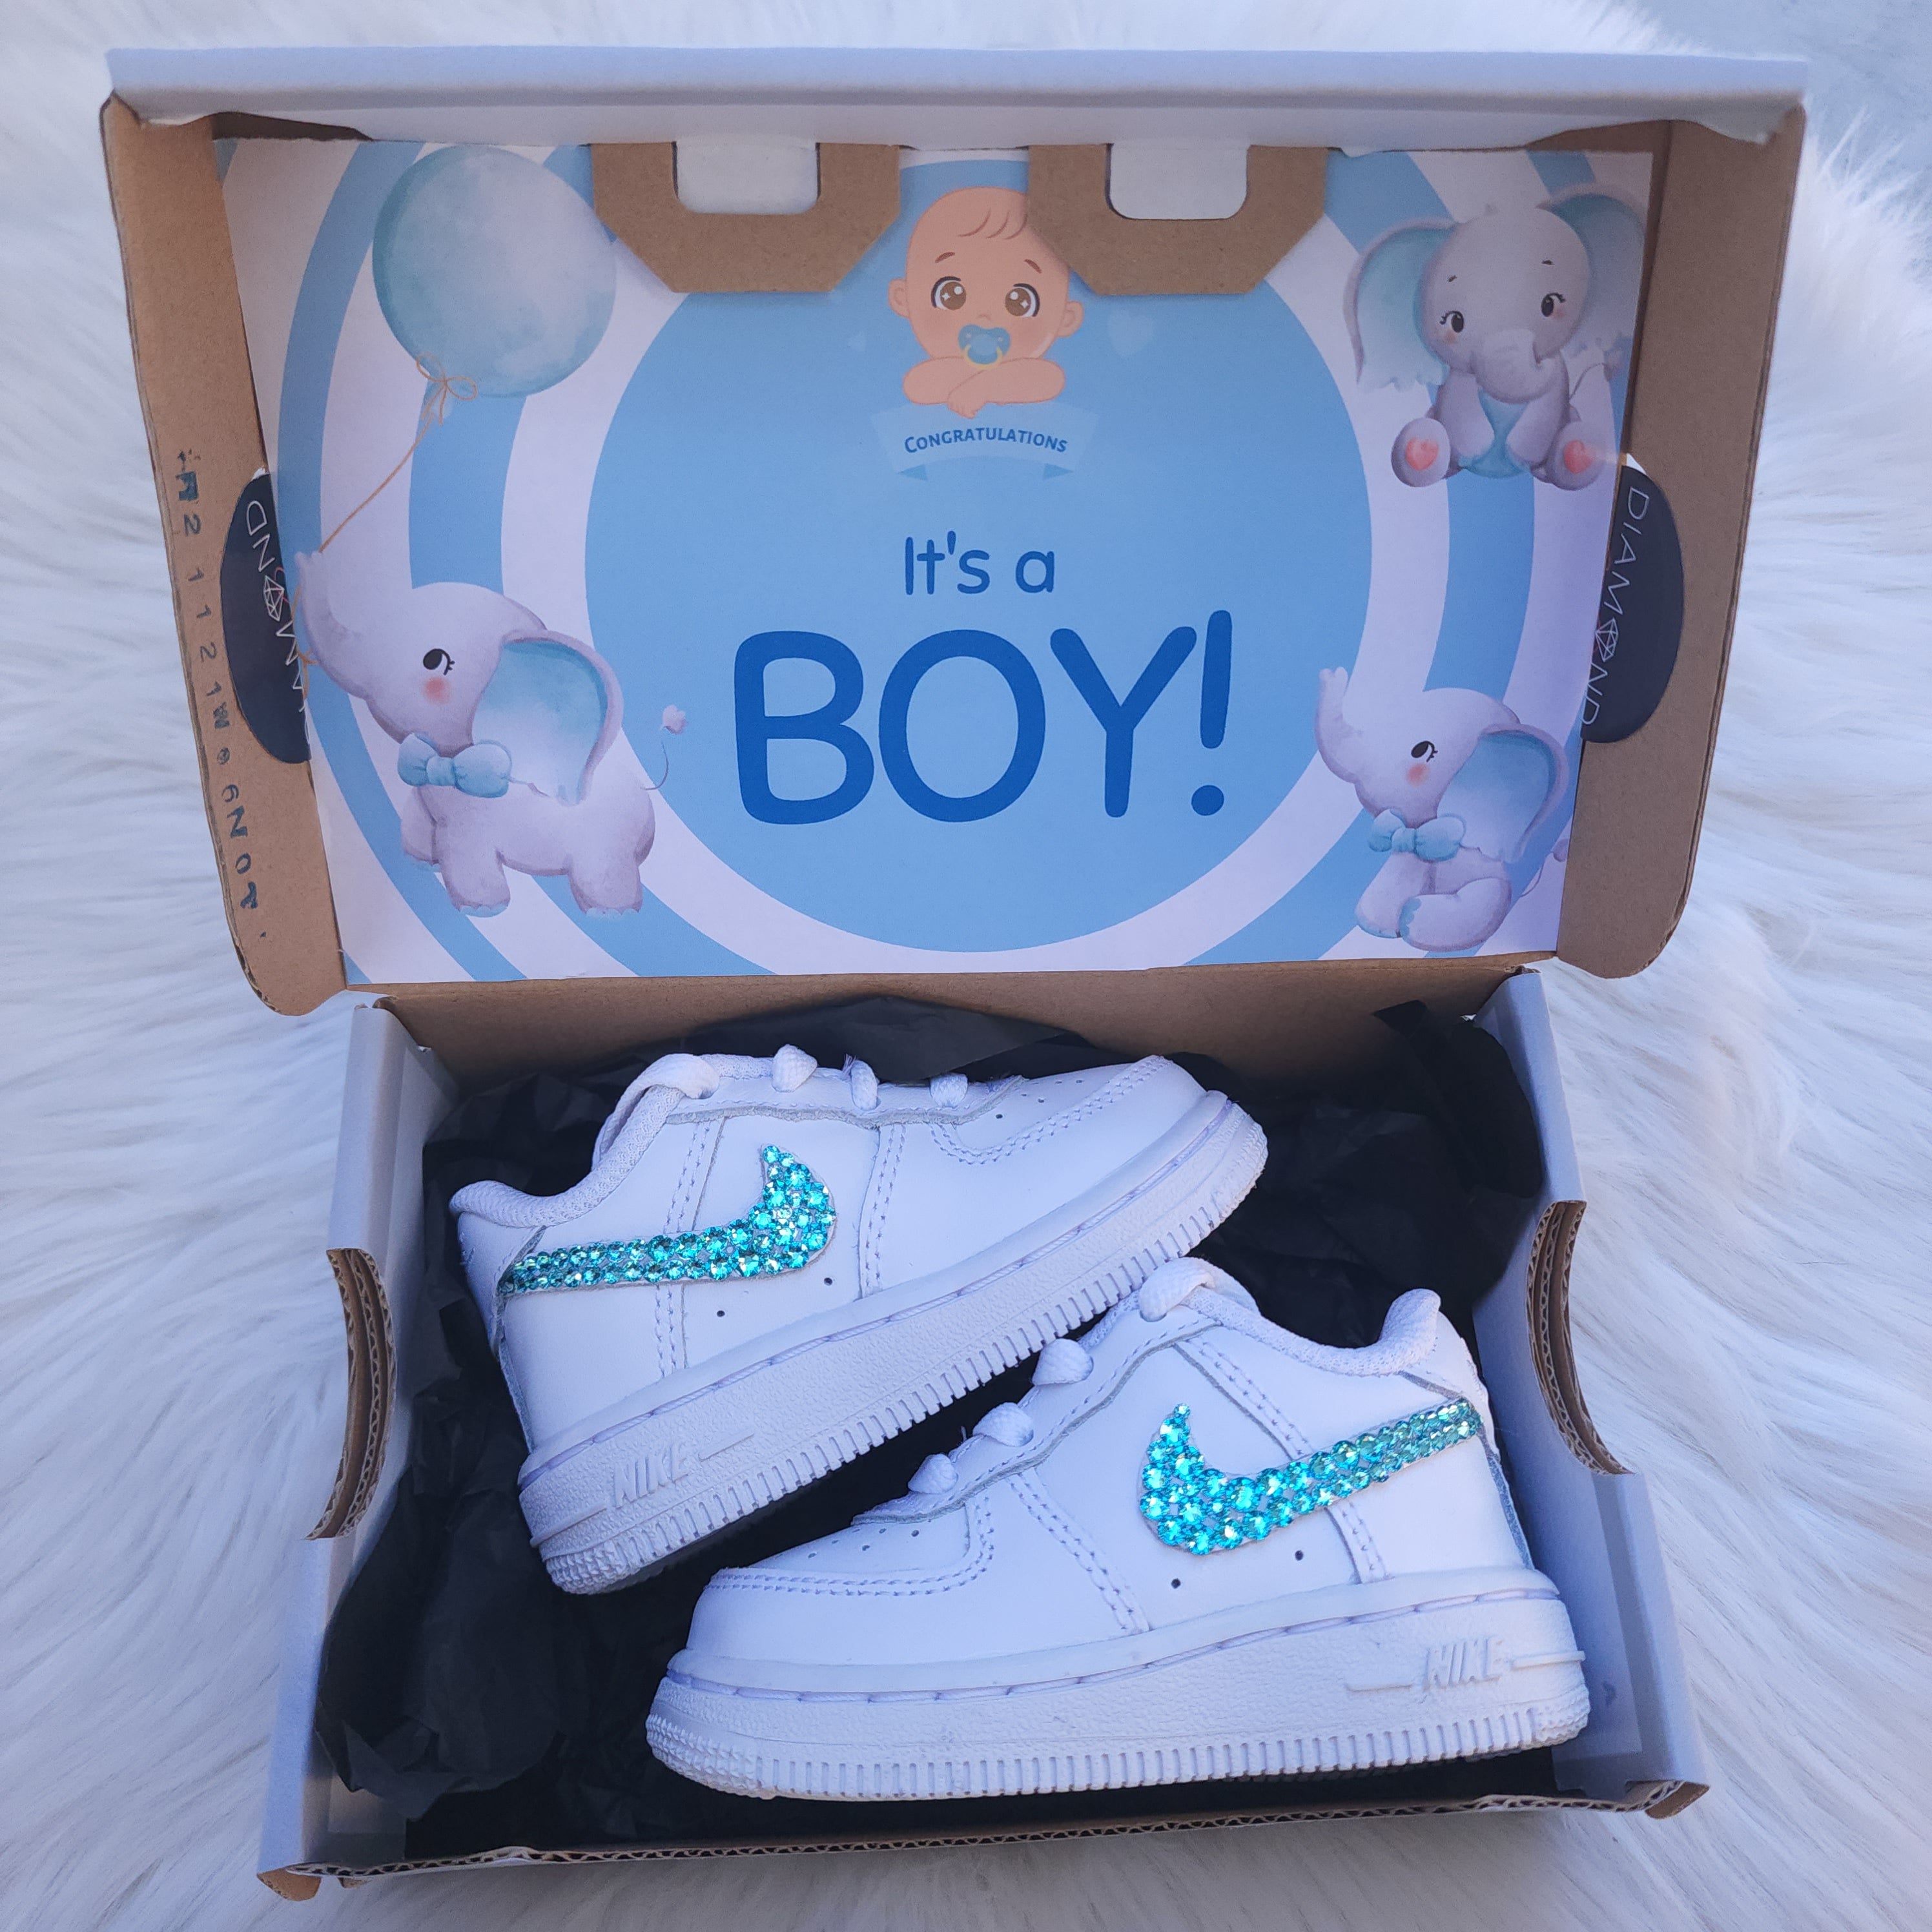 Air Force 1 Toddler (White)